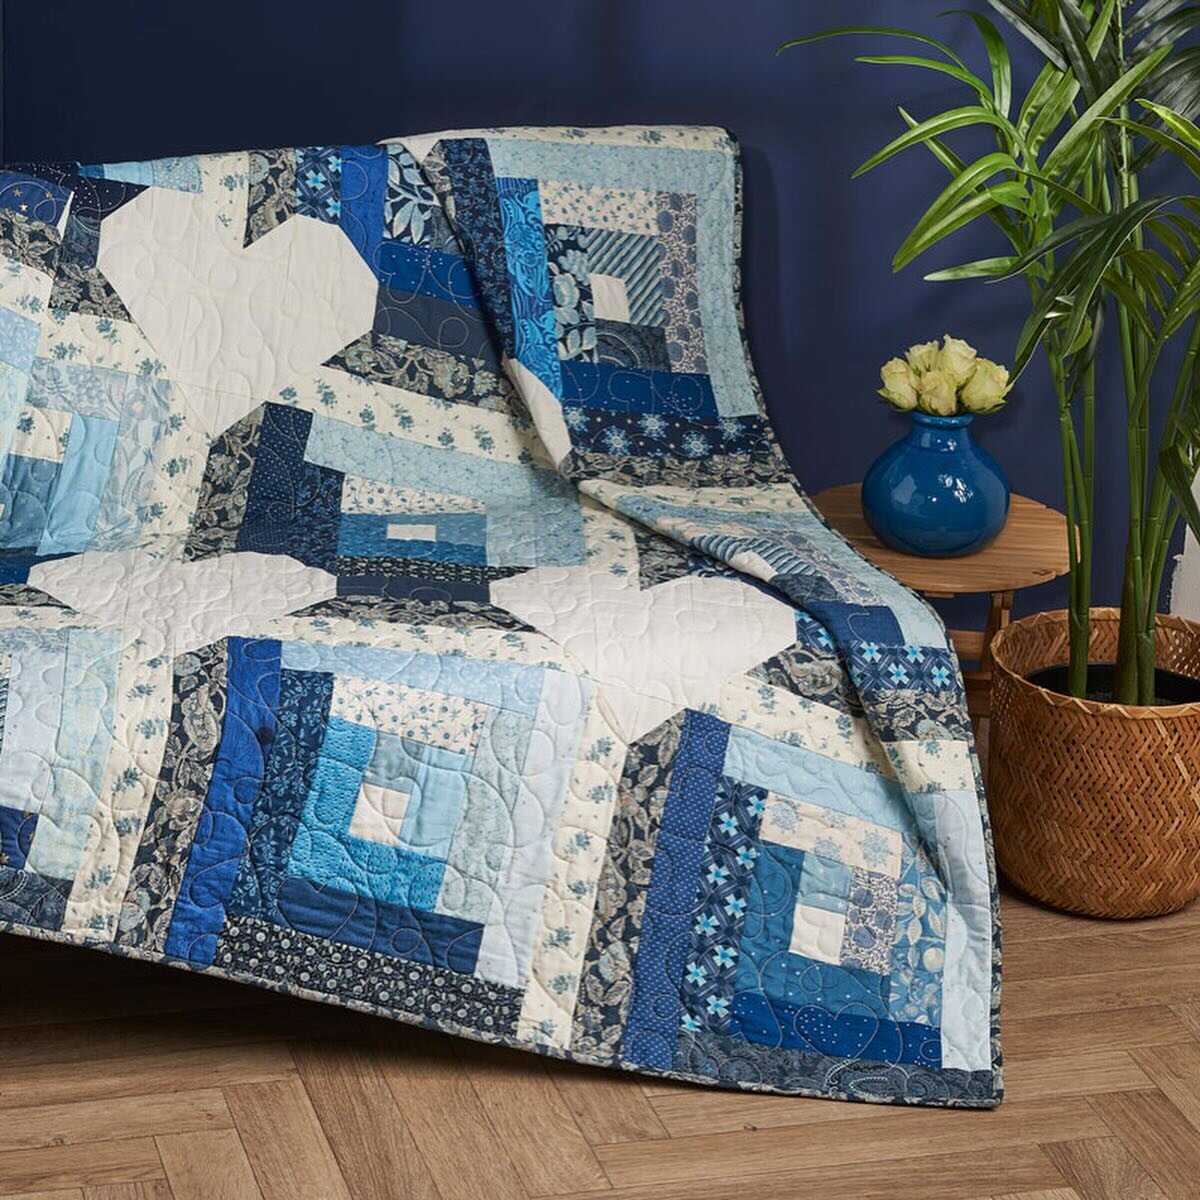 🩵 Have you seen our new quilt, Log Cabin Love in issue 111 of Todays Quilter magazine? 

We&rsquo;re thrilled to have another of our patterns in @todaysquilter and their photography is always so beautiful 💙

We made the quilt in blues (our comfort 